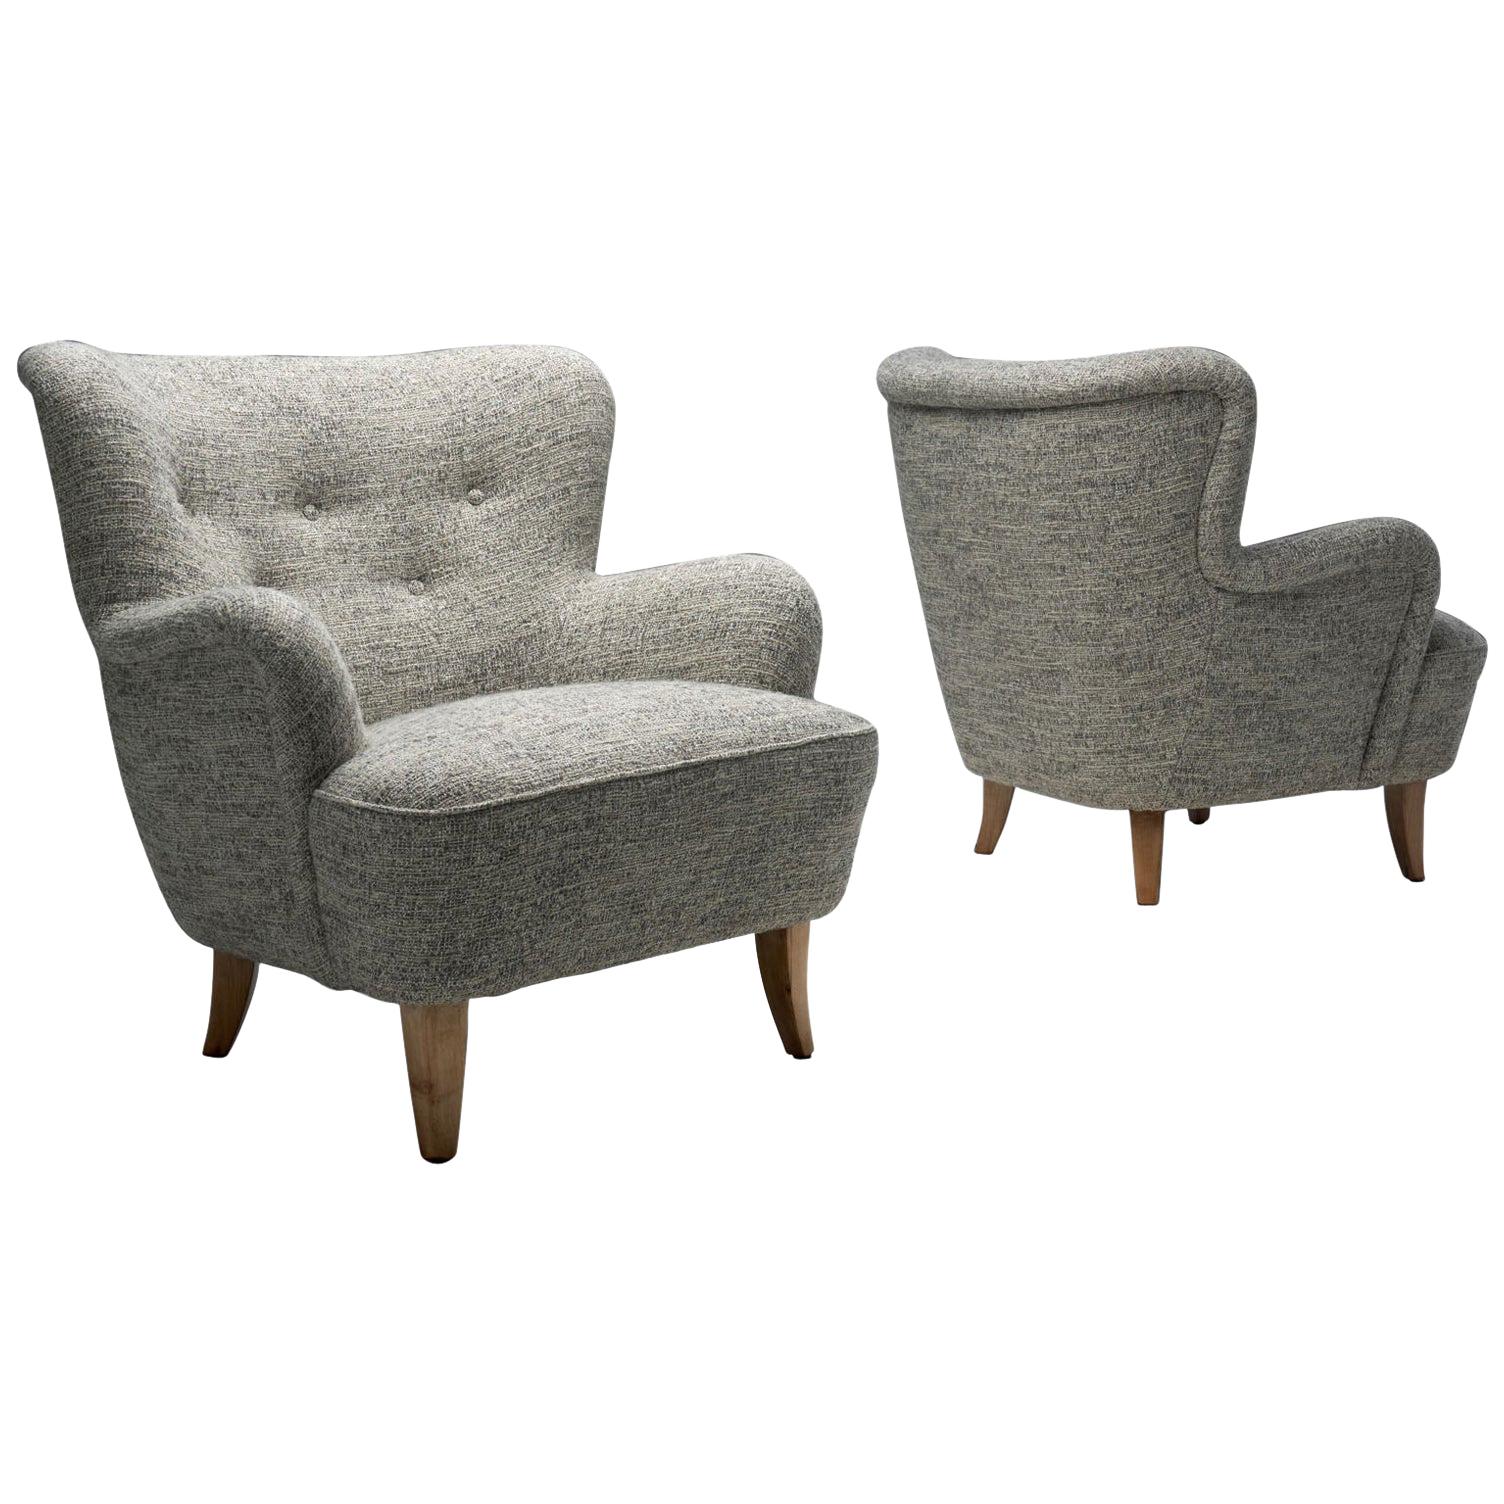 Pair of “Laila” Armchairs by Ilmari Lappalainen for Asko, Finland, 1948 For Sale